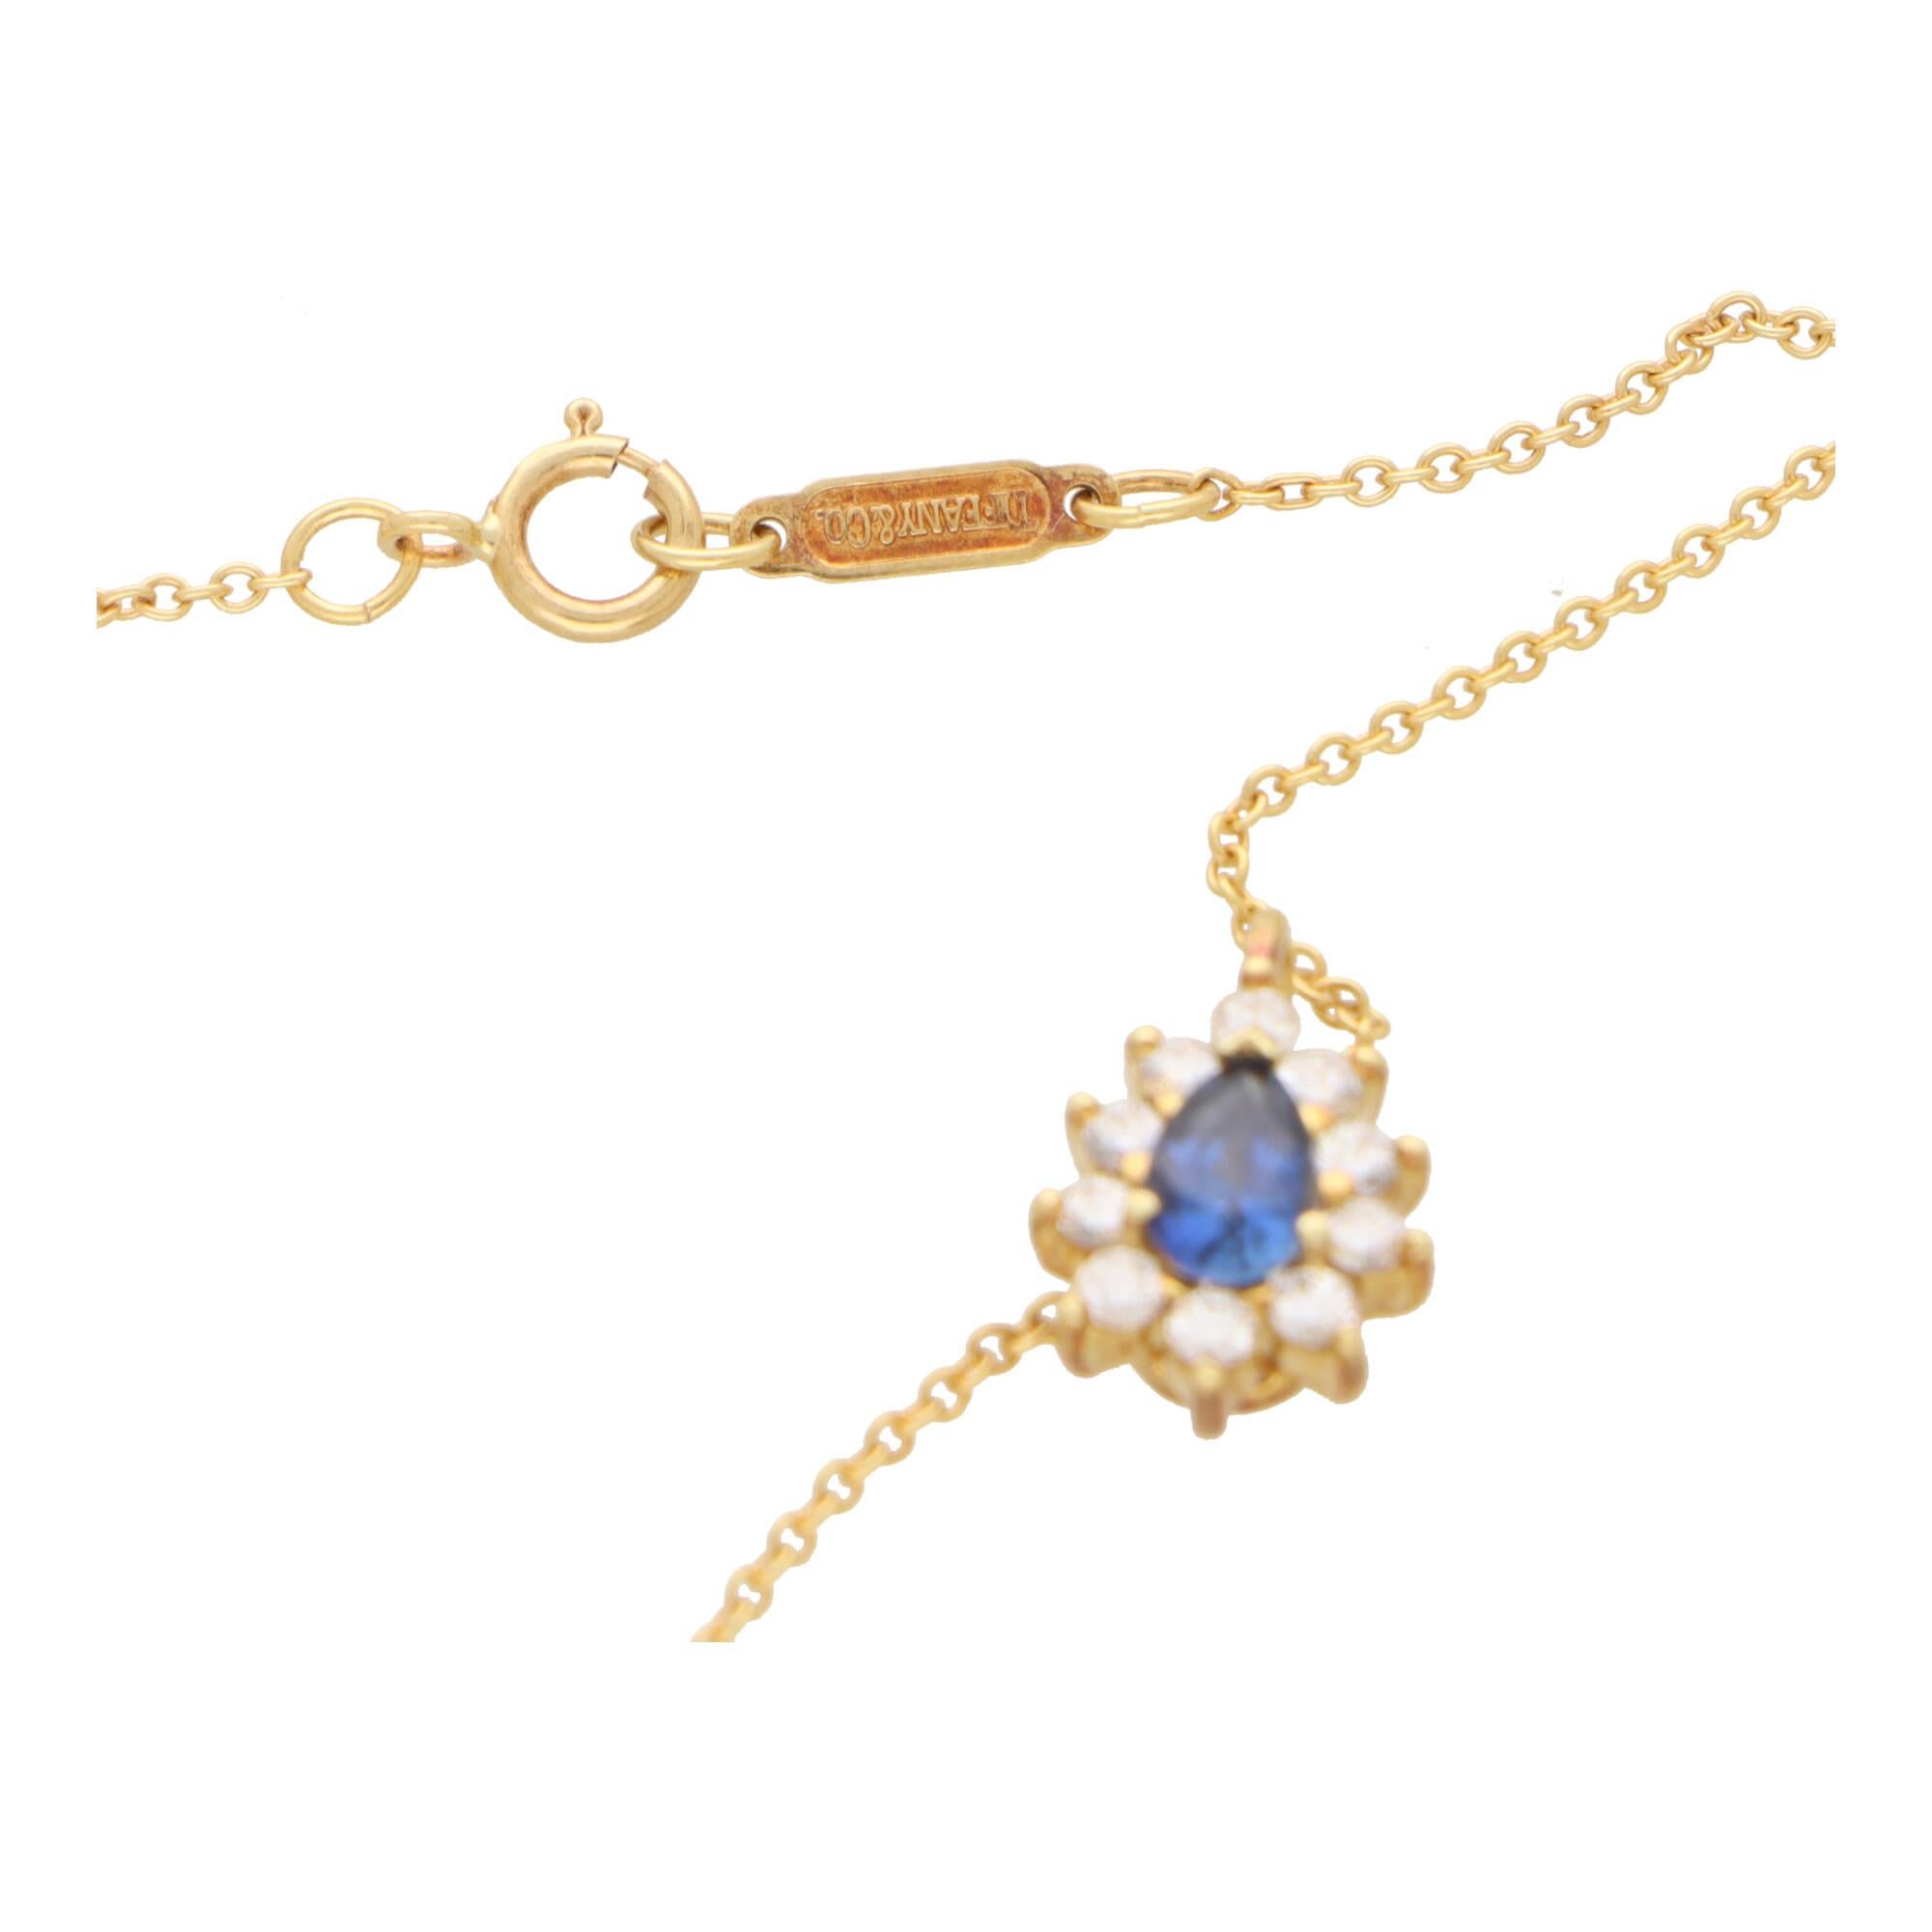 
A beautiful vintage Tiffany & Co. sapphire and diamond cluster pendant necklace set in 18k yellow gold.

The pendant is firstly composed of a pear cut blue sapphire which is surrounded by a cluster of 10 round brilliant cut diamonds. The pendant